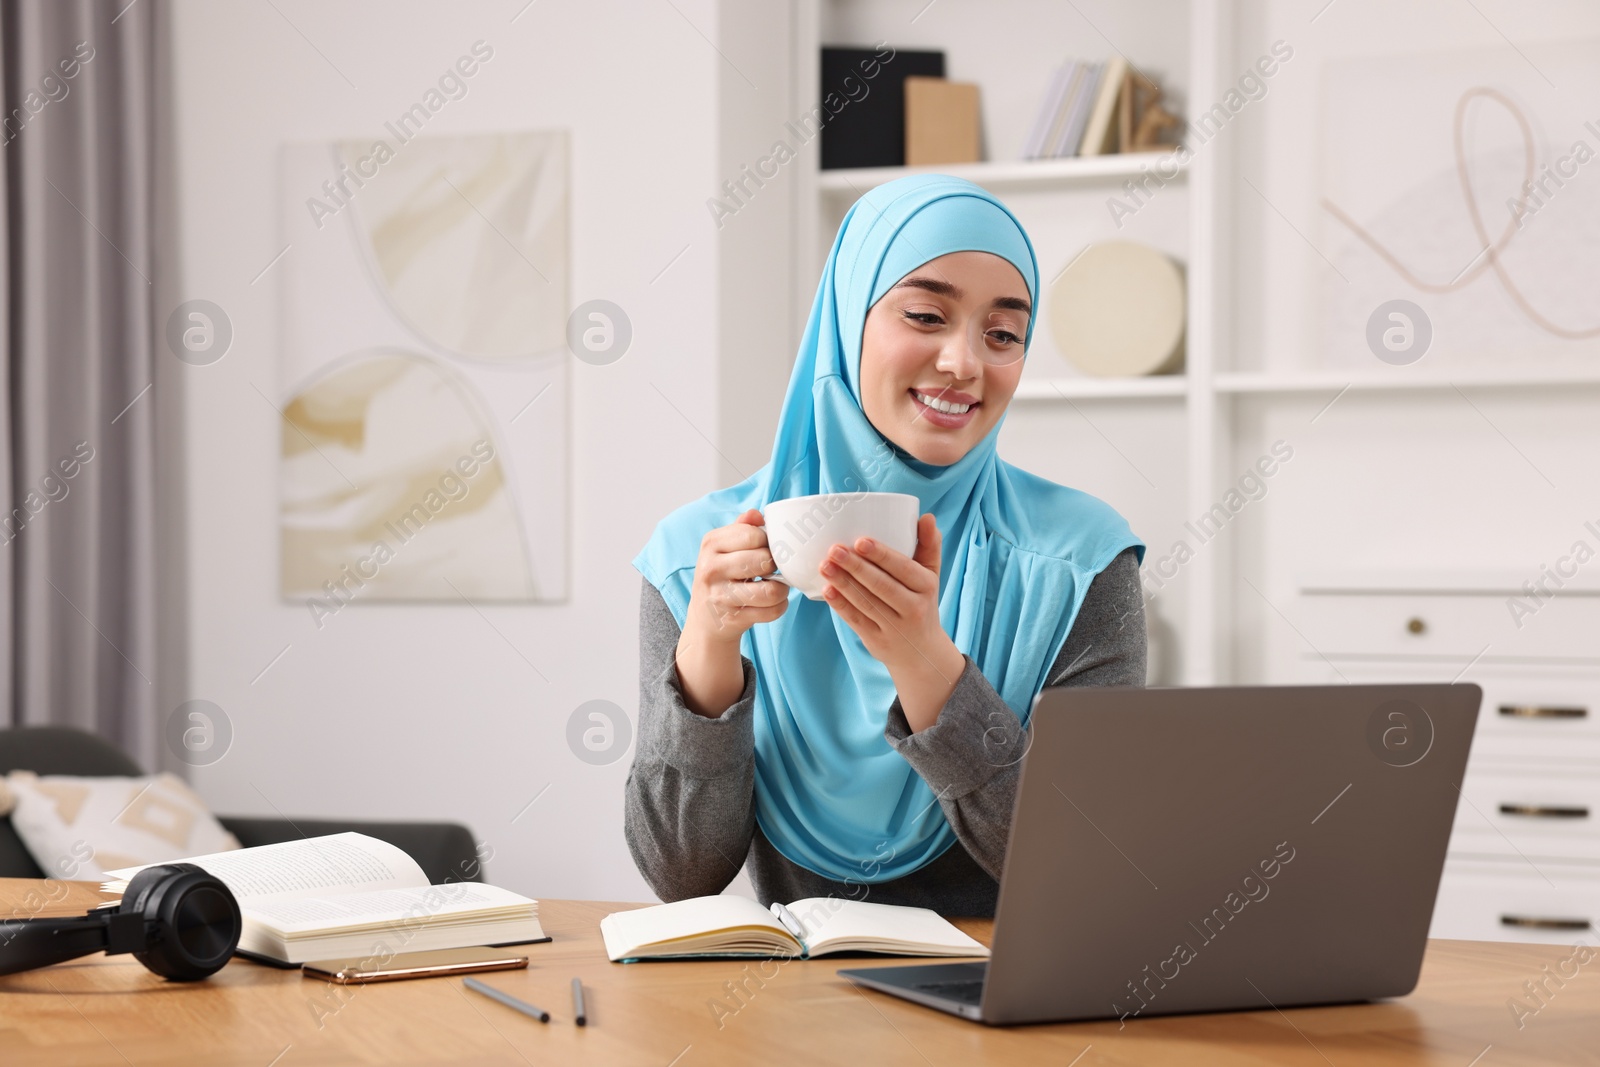 Photo of Muslim woman in hijab with cup of coffee using laptop at wooden table in room